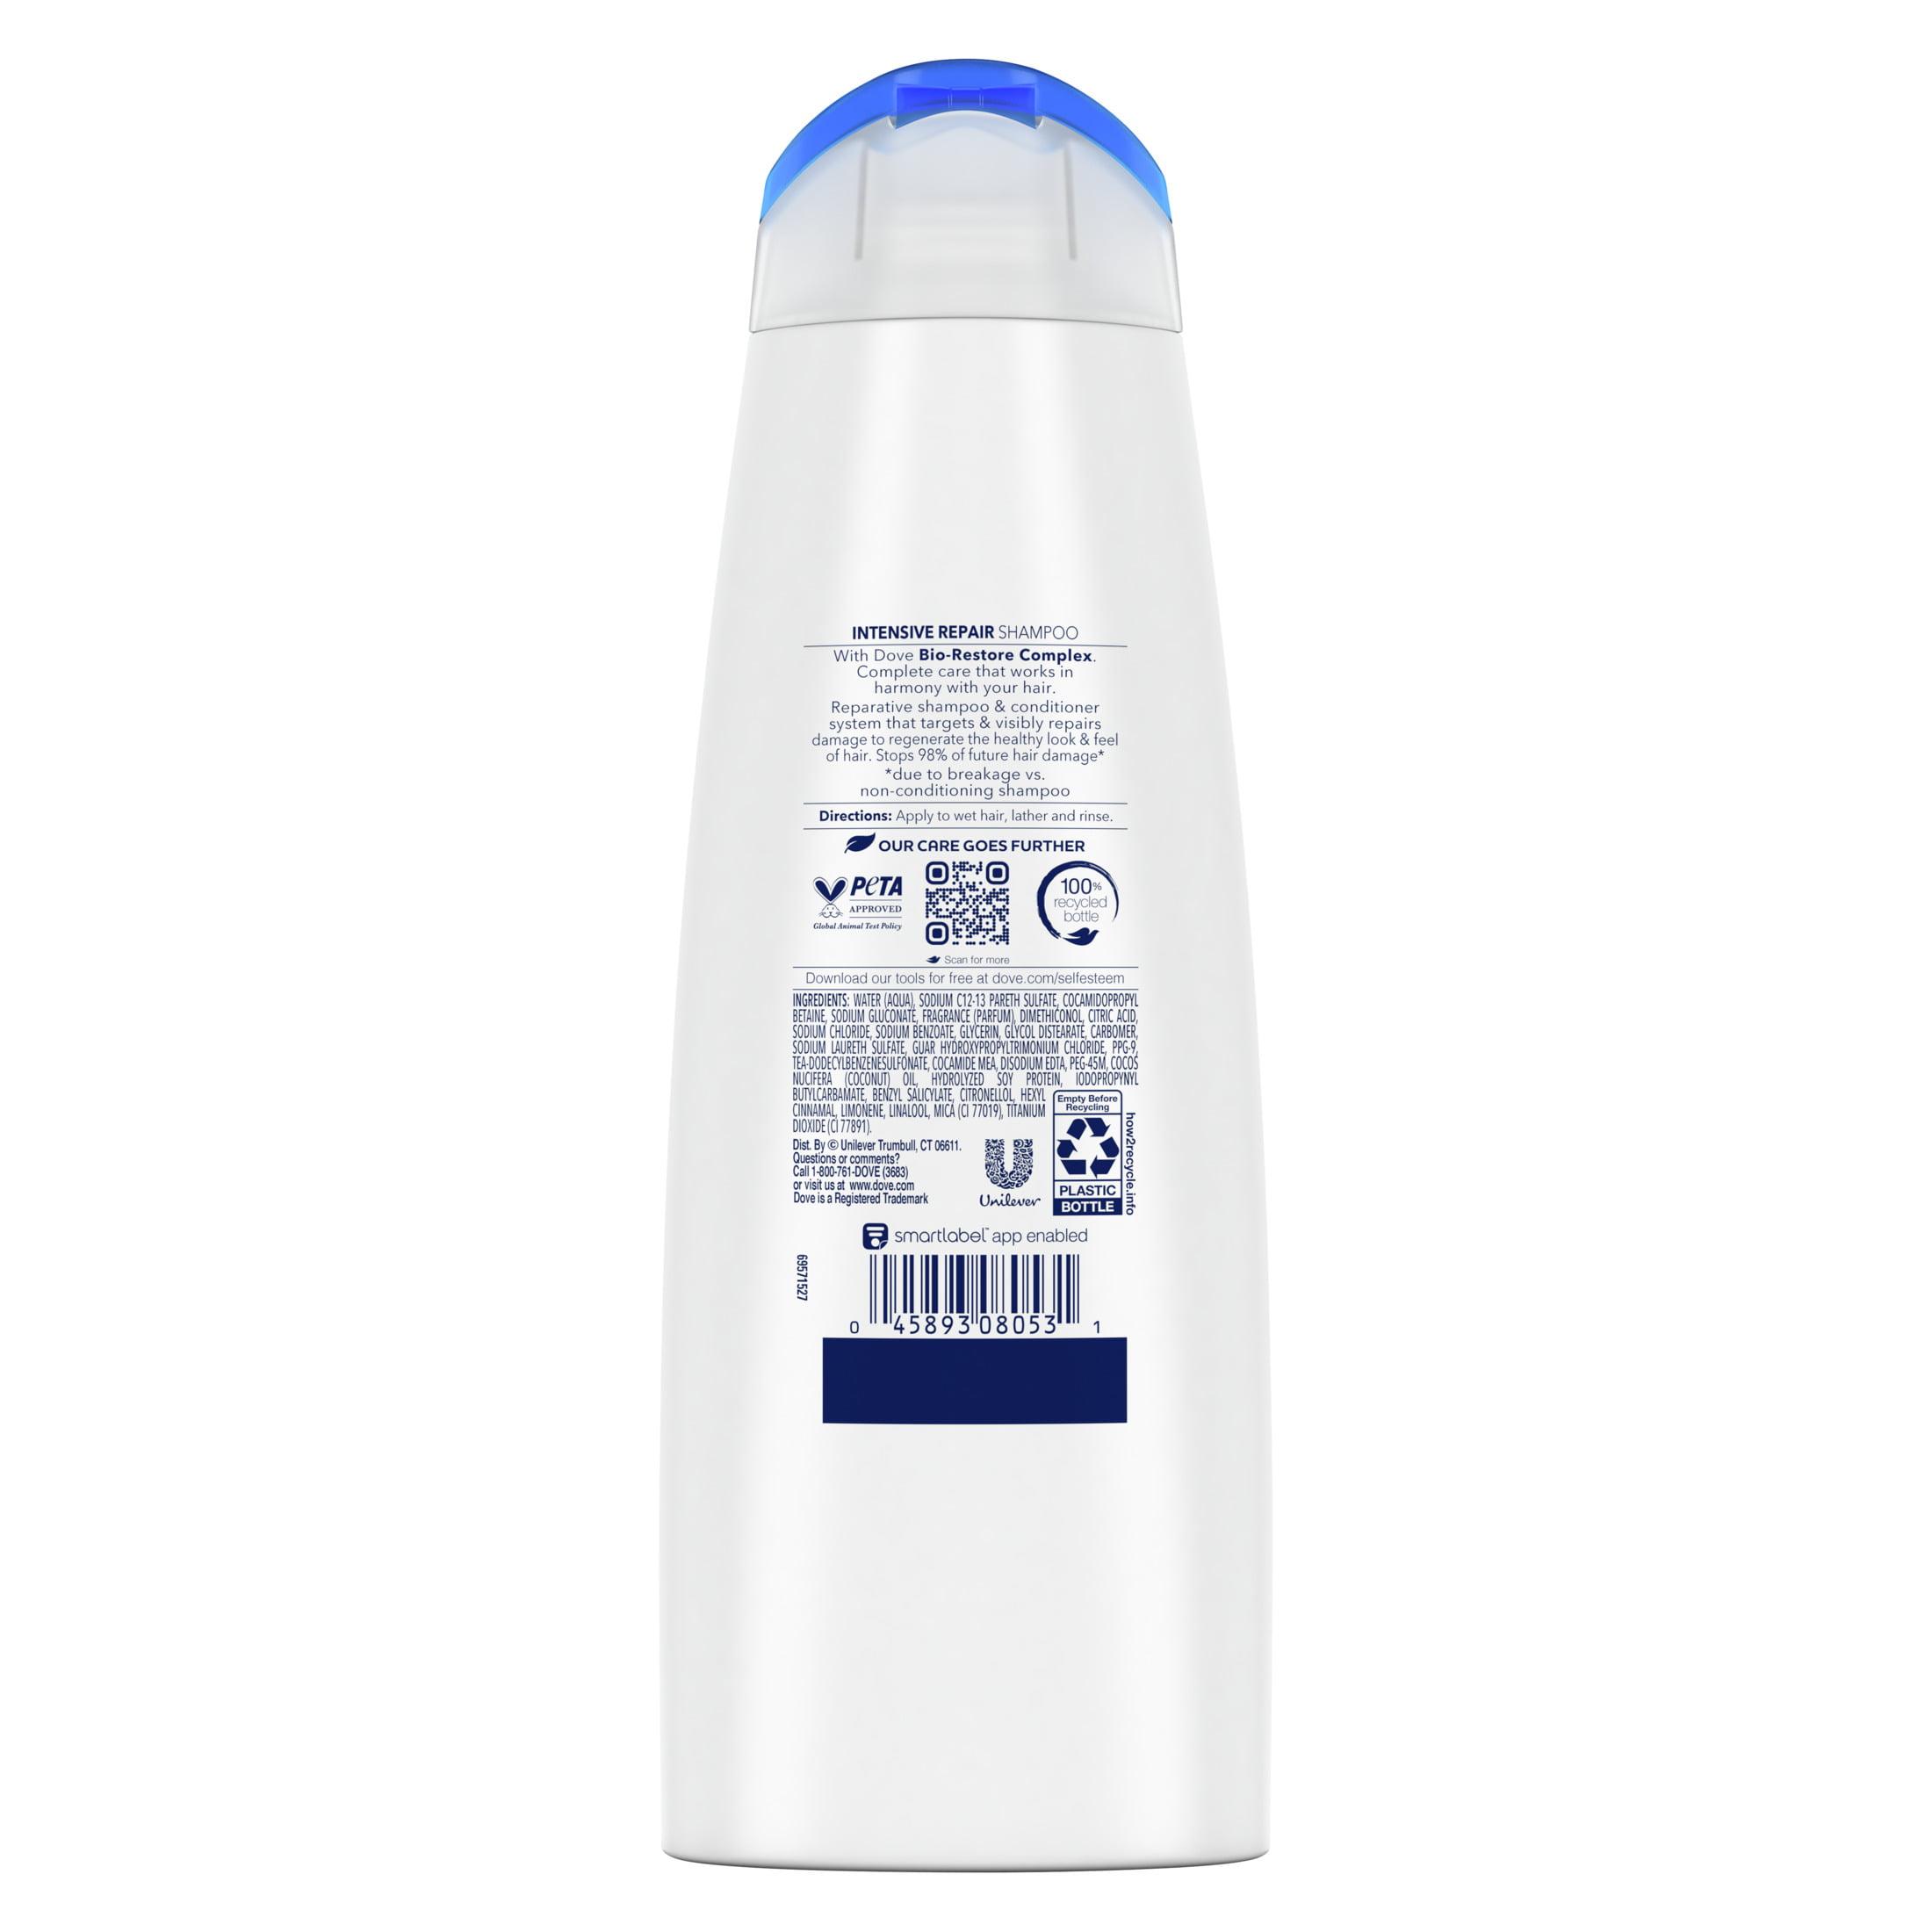 Dove Ultra Care Nourishing Intensive Repair Daily Shampoo for Damaged Hair, 12 fl oz - image 5 of 11